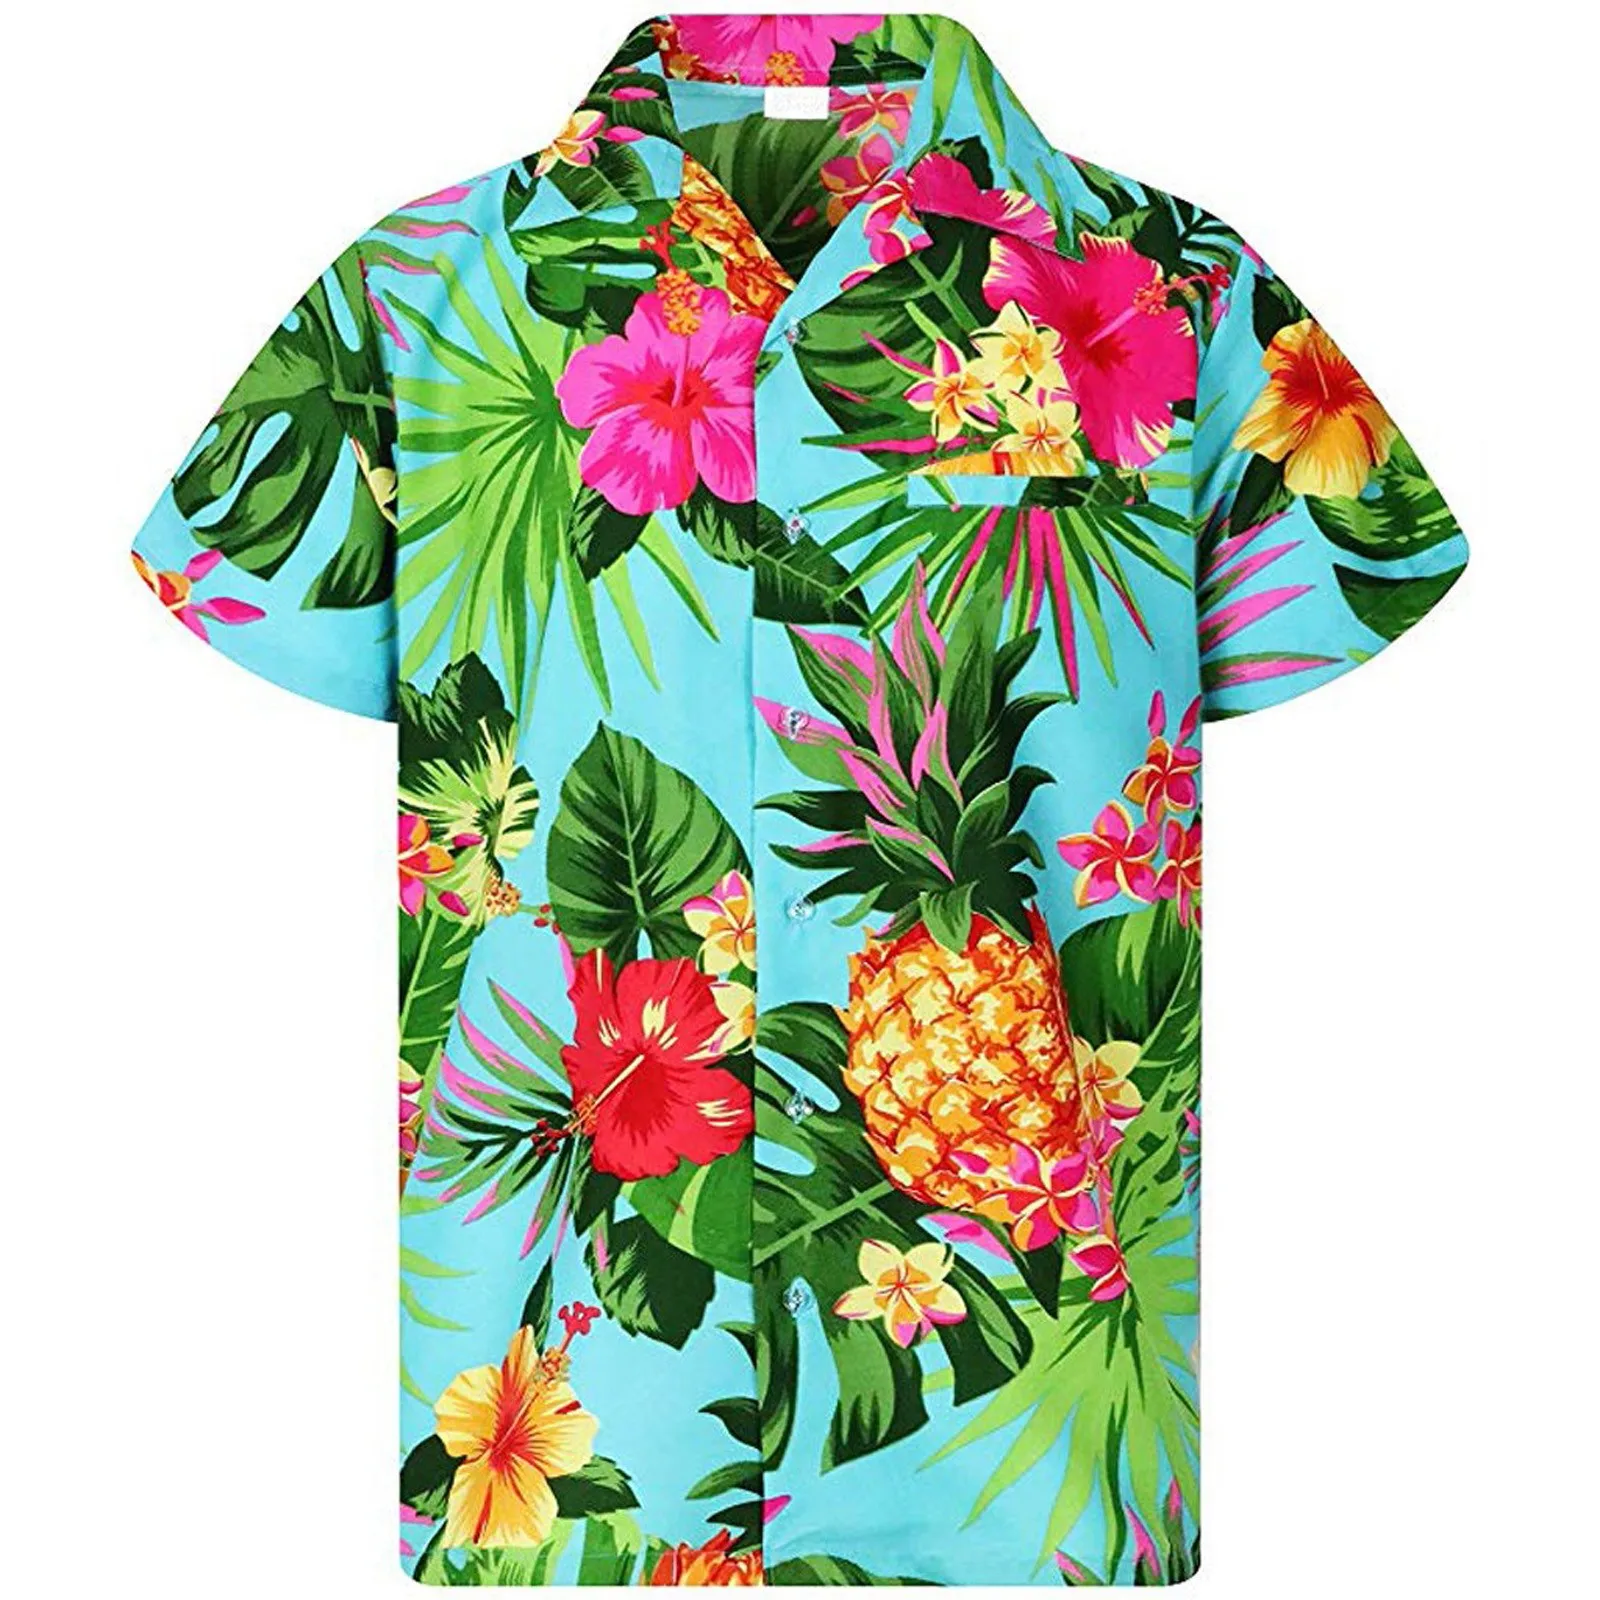 

Funky Women Hawaiian Shirt Frontpocket Leaves Flowers Pineapple Print Womens Tops And Blouses Summer Female Top